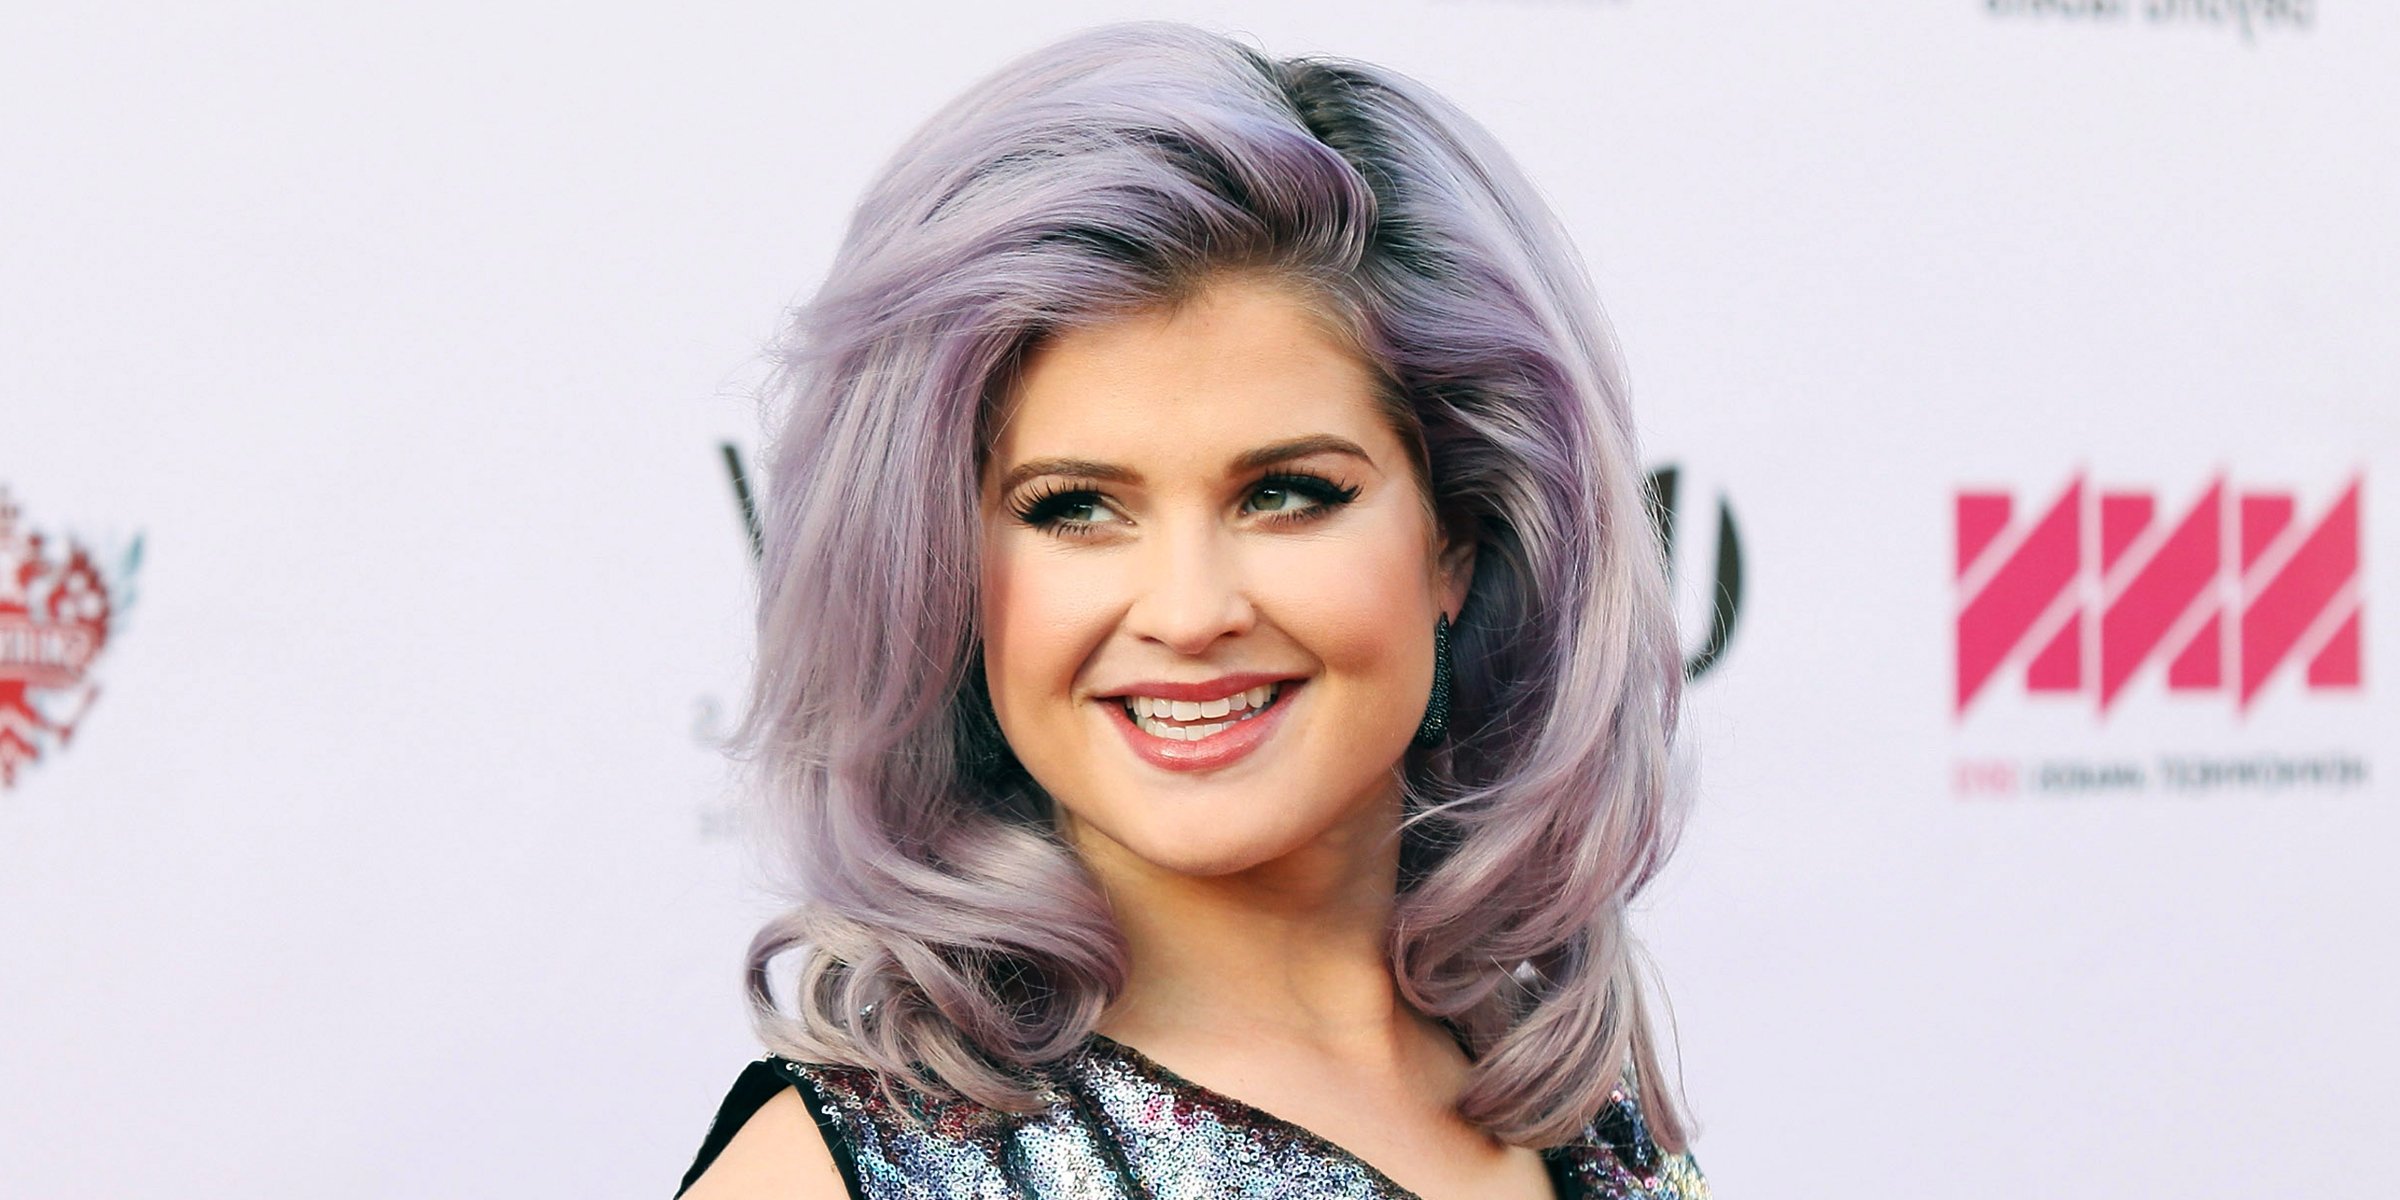 Kelly Osbourne, 2012 | Source: Getty Images